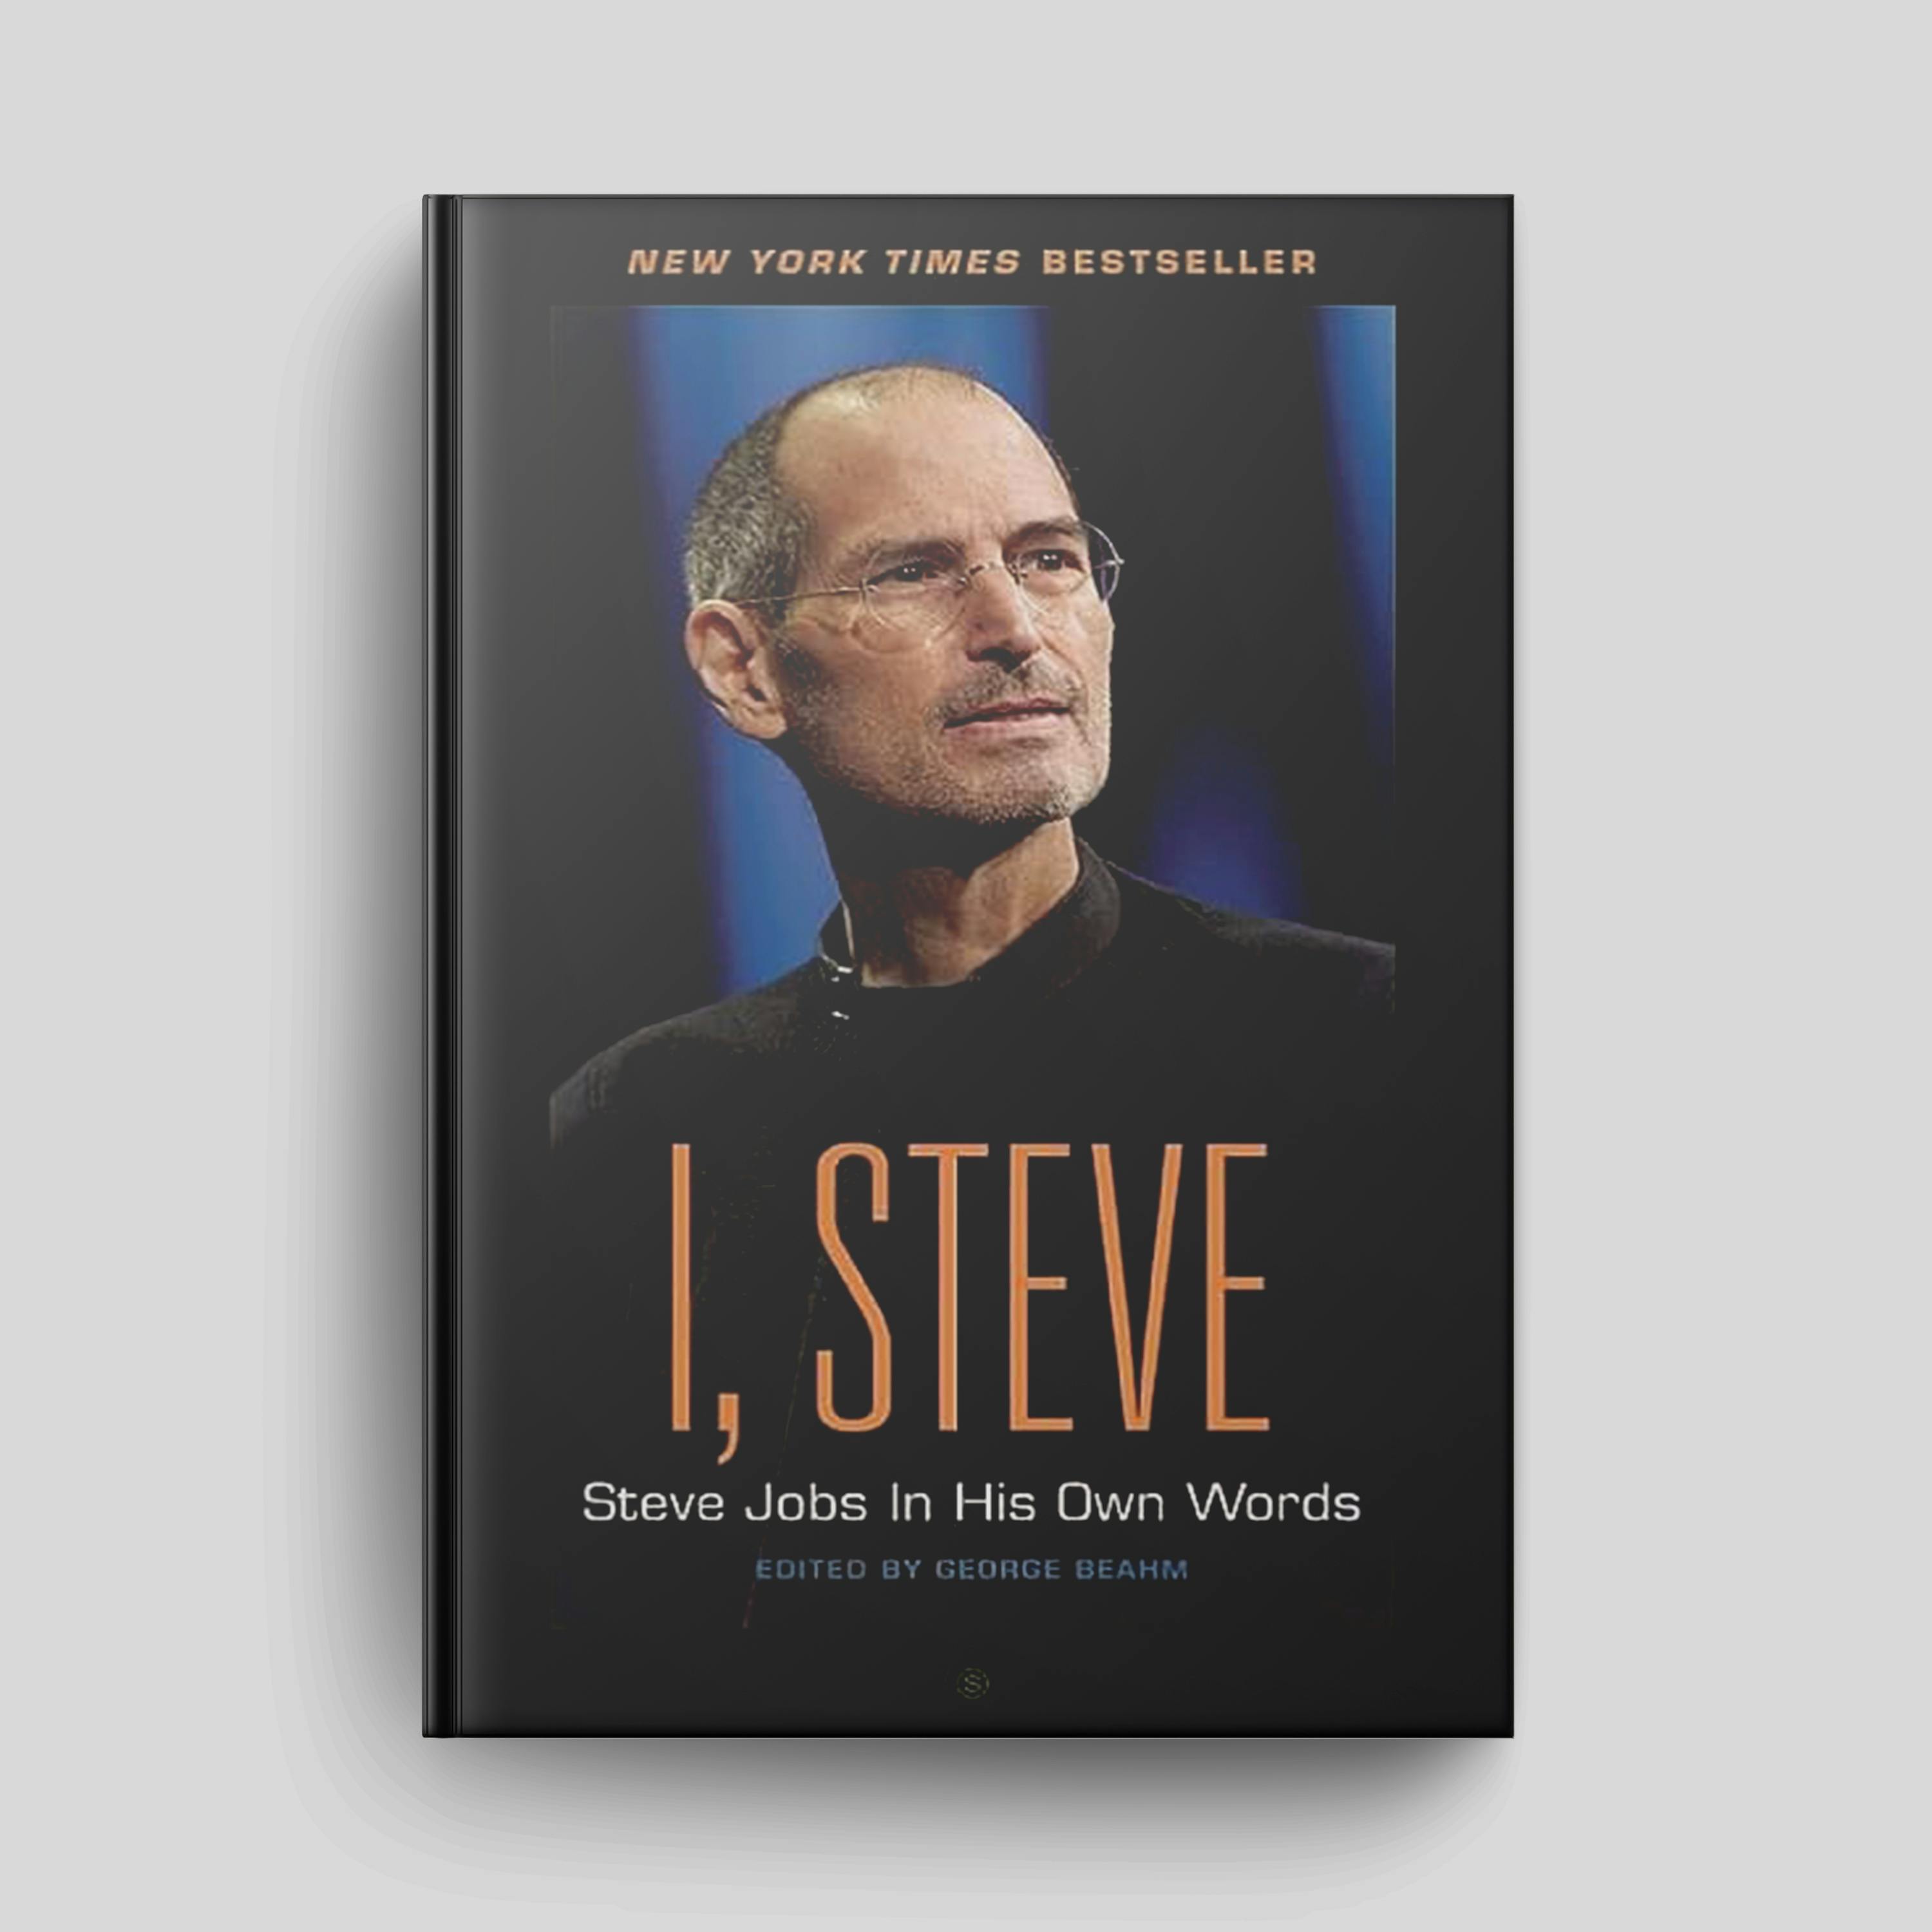 Book: "I, Steve: Steve Jobs in his Own Words" by George Beahm | Episode #172